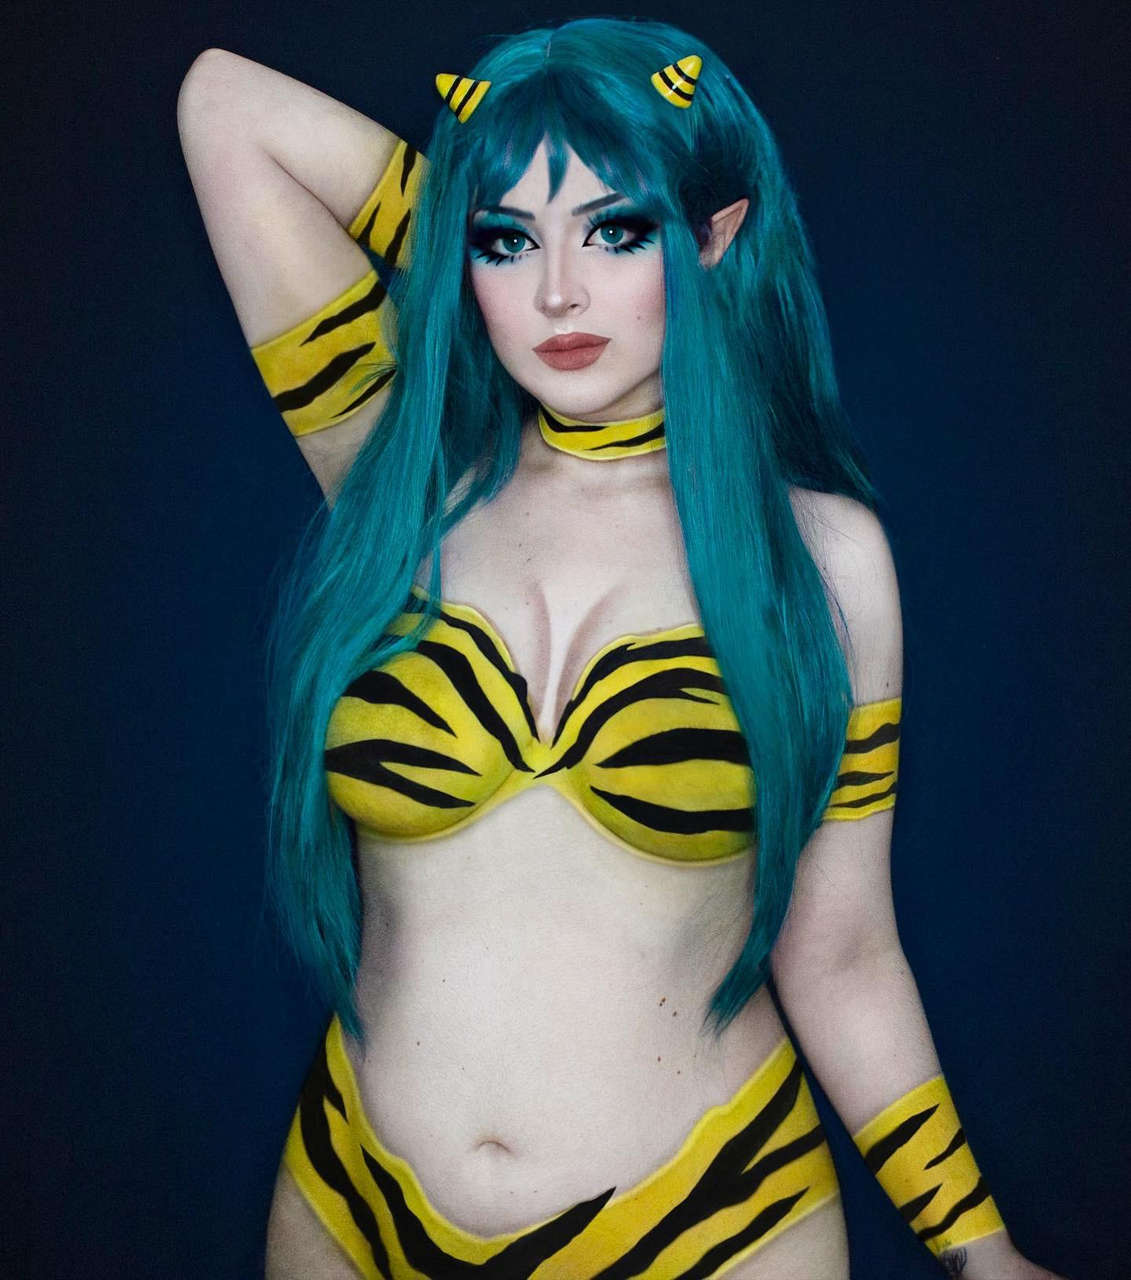 This Is My Lamu Lum Bodypaint Cosplay What Do You Thin